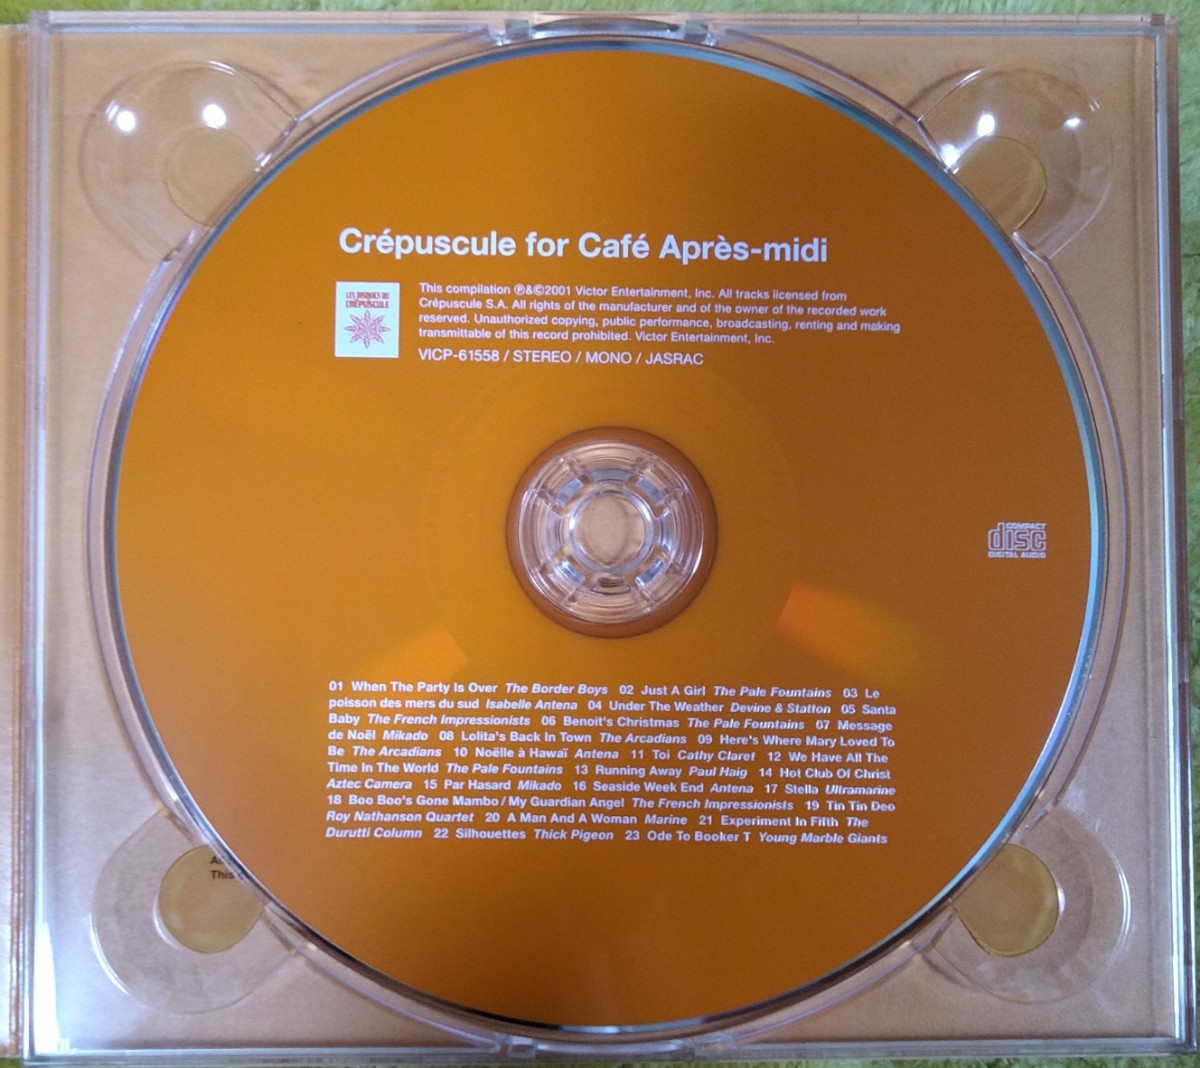 kreps cue ru* four * Cafe *a pre midi records out of production with belt domestic record used CD crepuscule for cafe apres-midi VICP-61558 2520 jpy record 